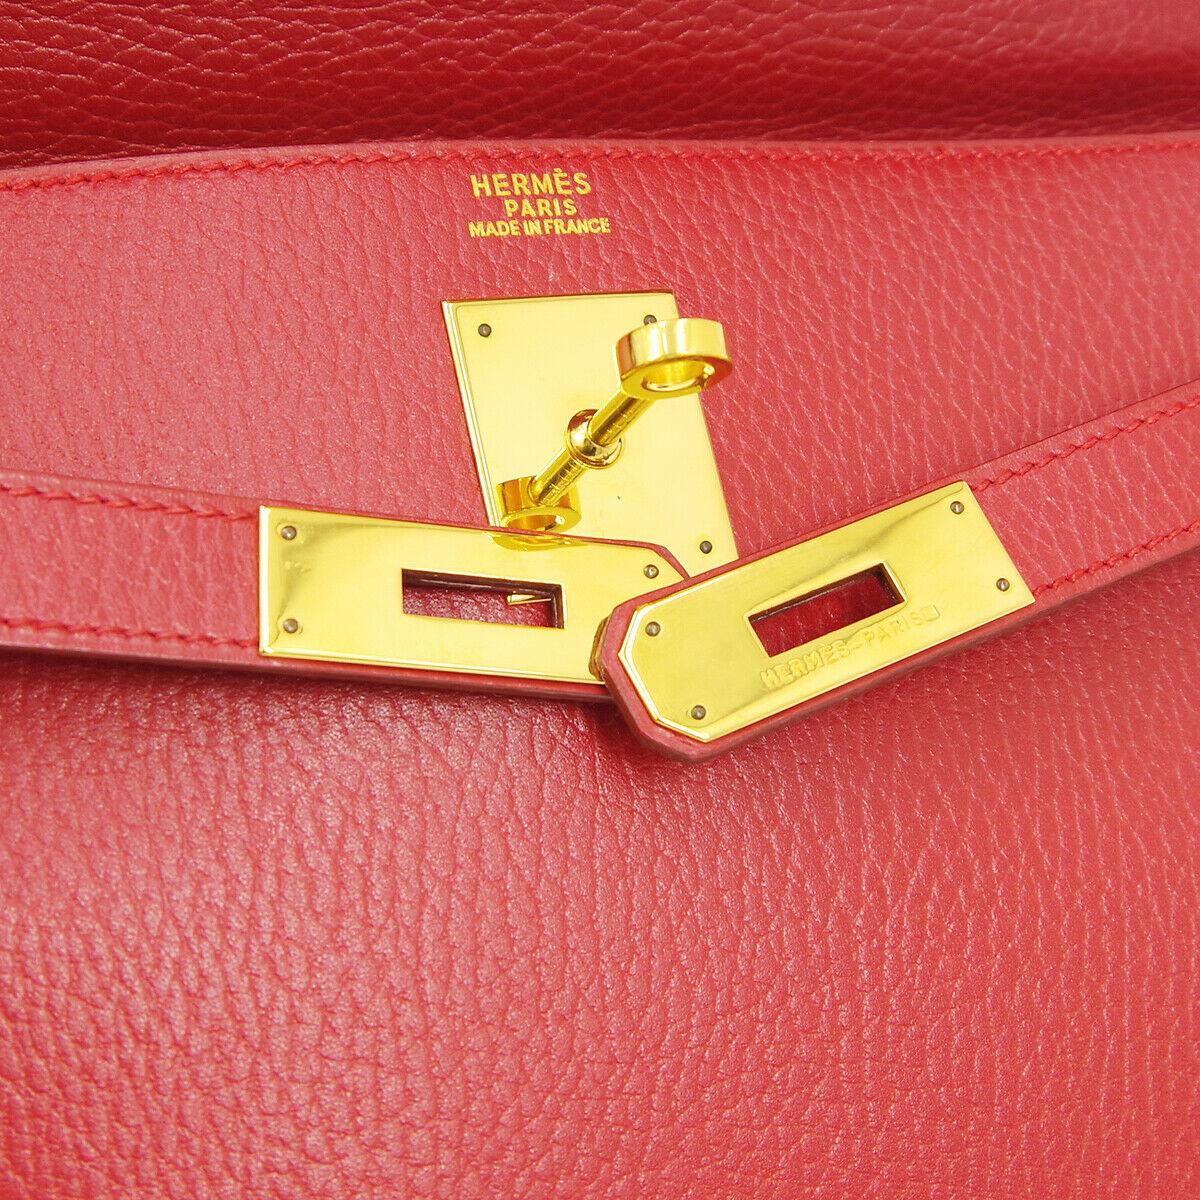 Hermes Kelly 32 Red Leather Gold Top Handle Satchel Evening Shoulder Tote Bag

Leather
Gold tone hardware
Leather lining
Date code present
Made in France
Handle drop 3.5